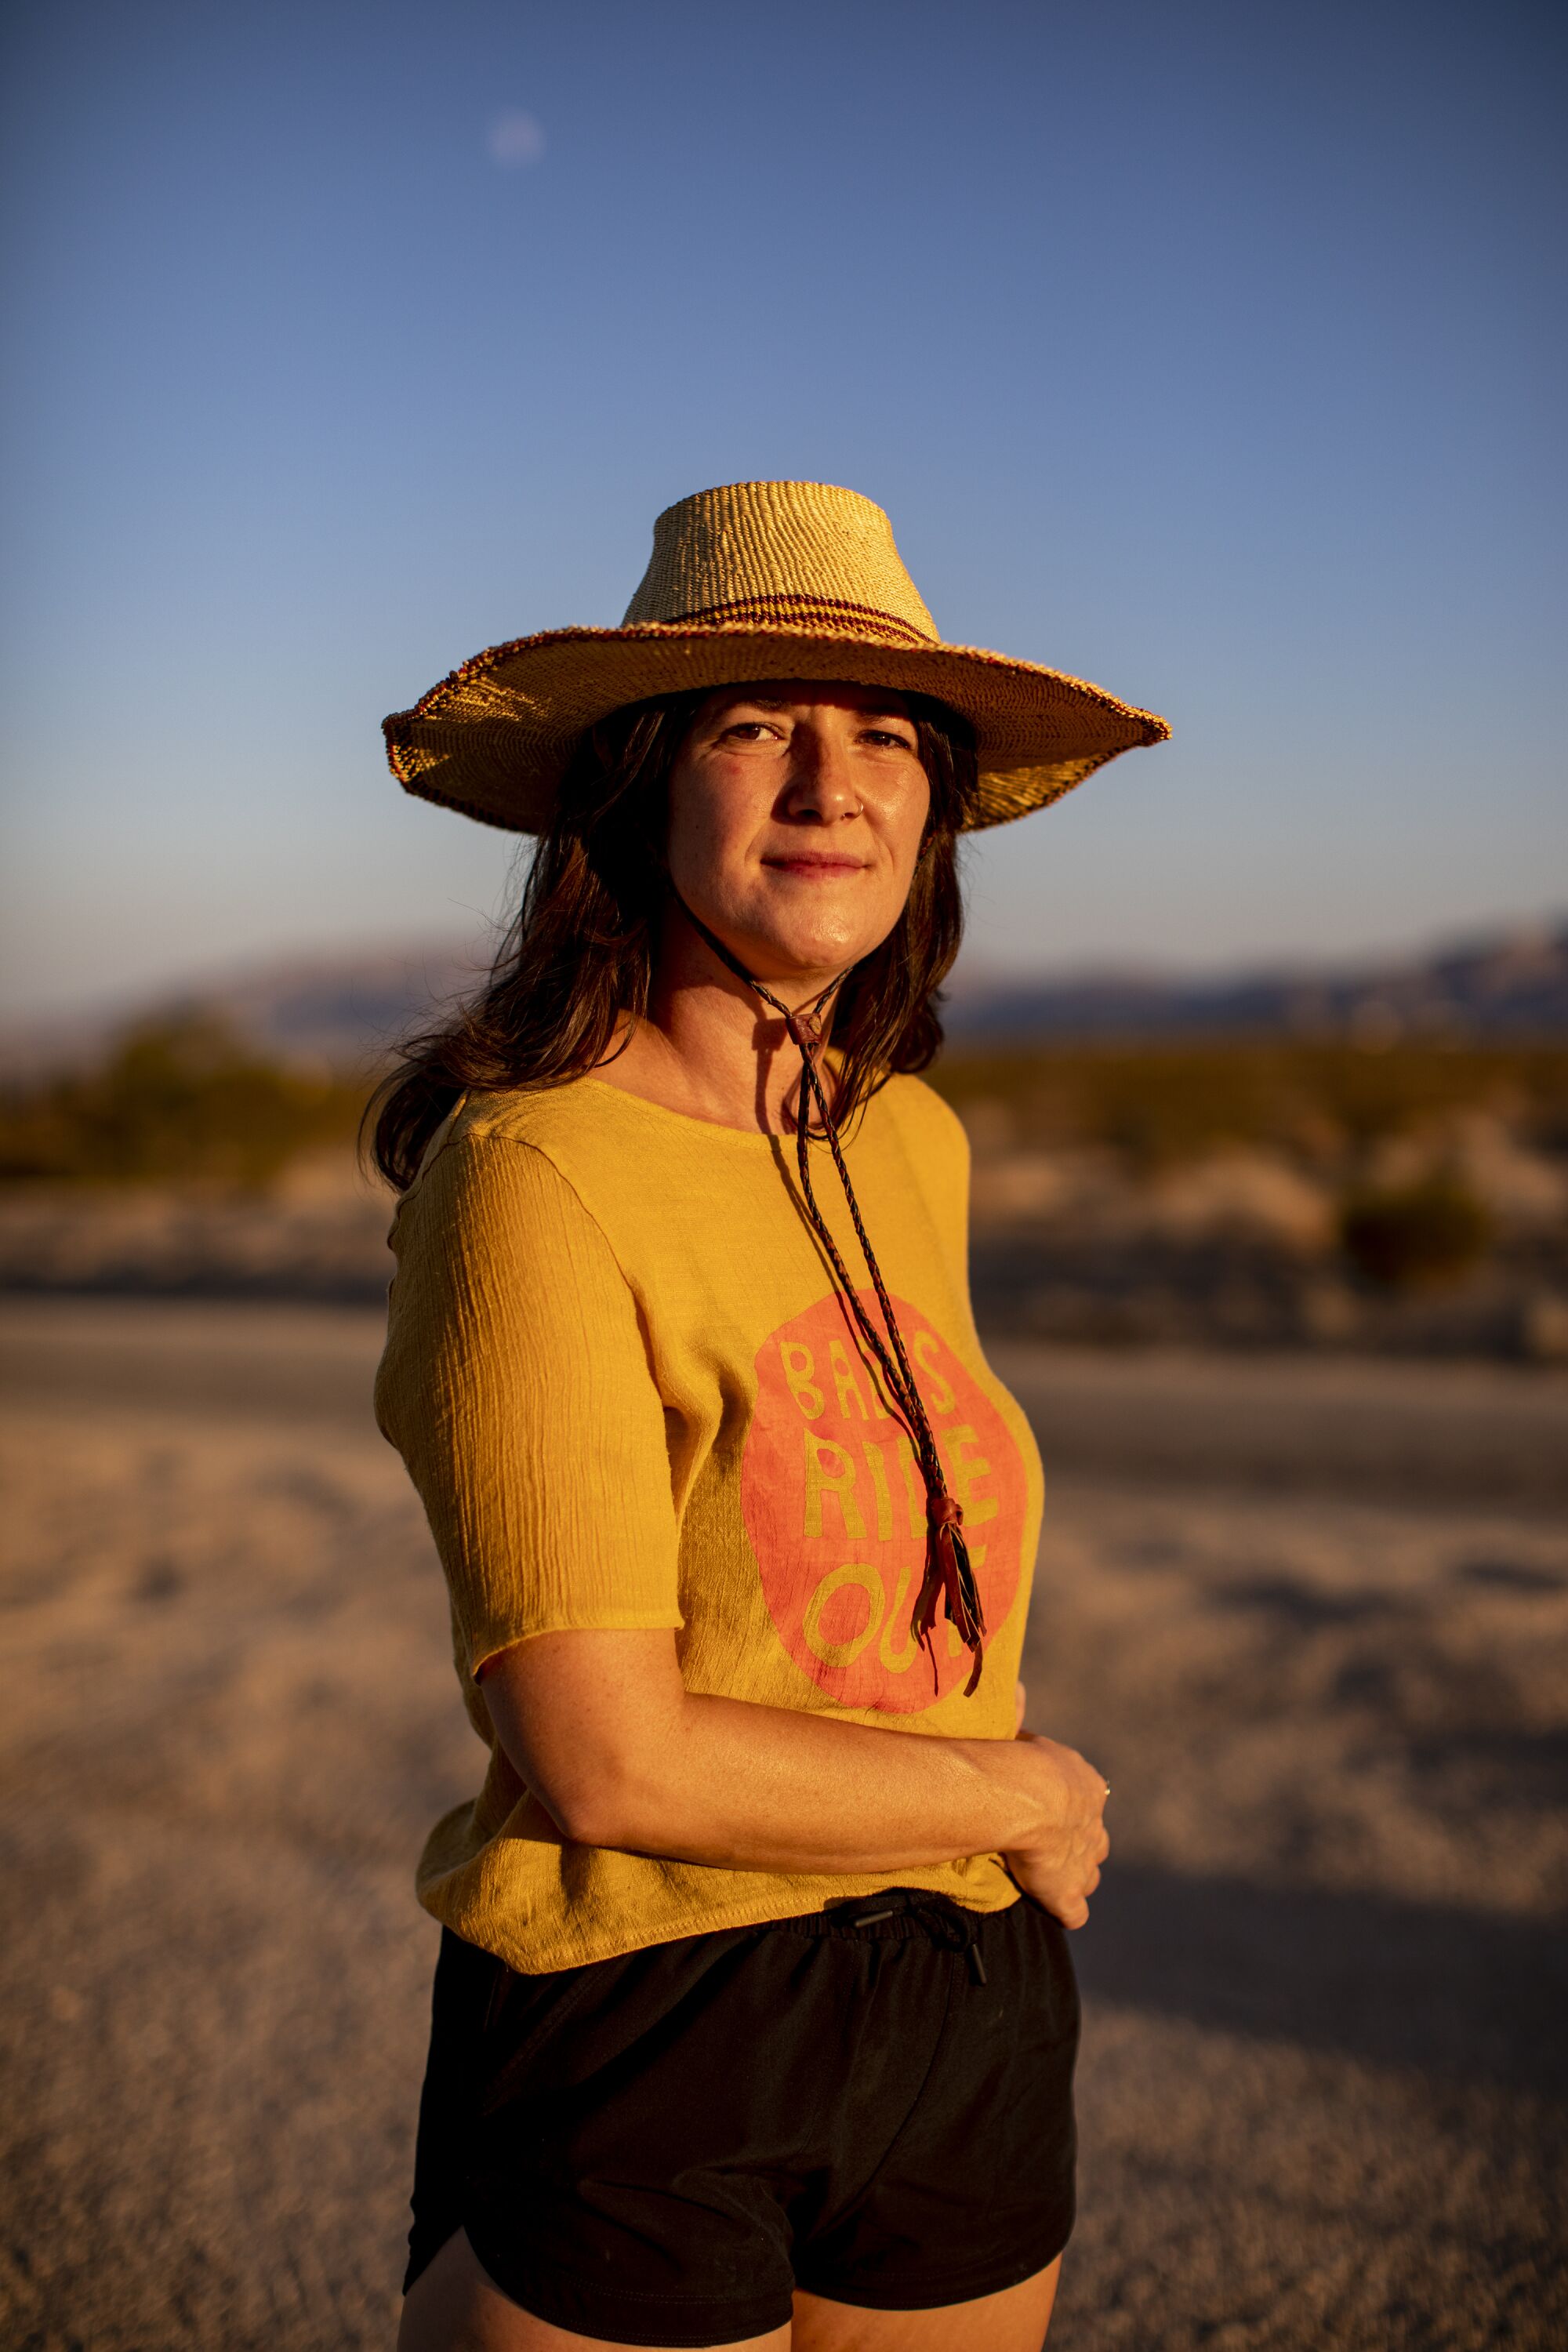 Author Claire Vaye Walkins wears a straw hat, yellow T-shirt and black shorts in the desert.